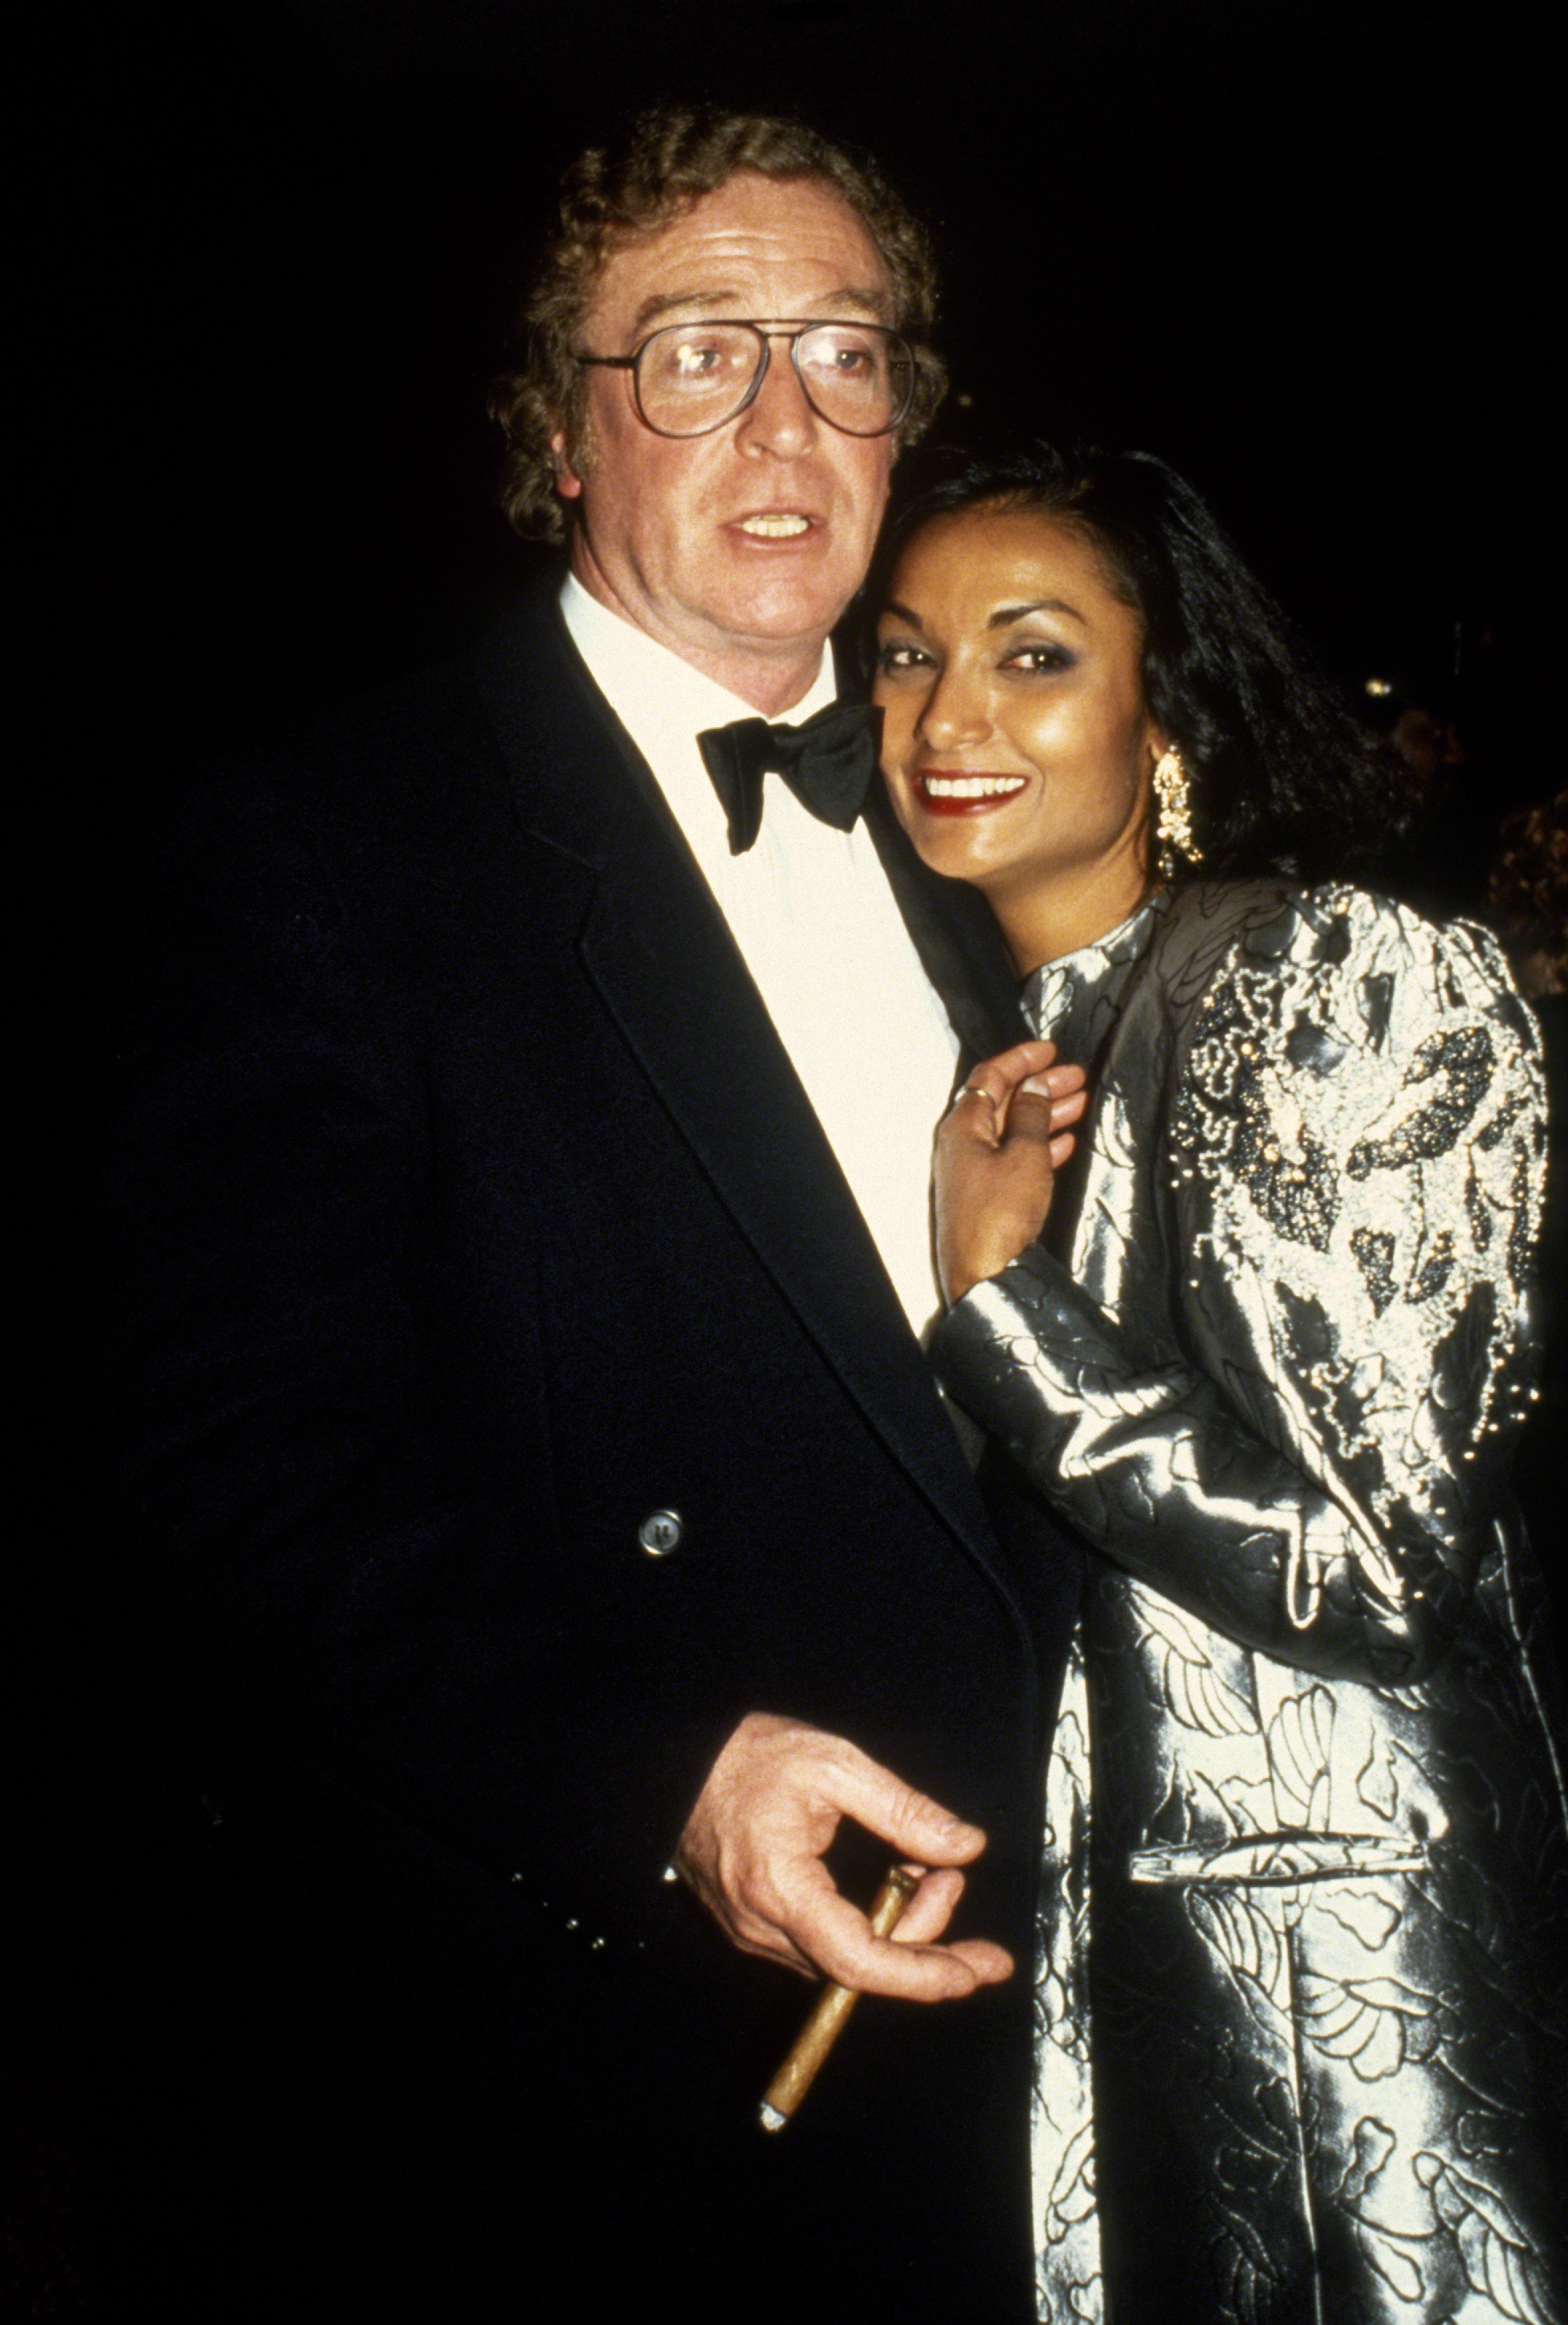 Michael Caine and wife Shakira circa 1985 in New York City. | Source: Getty Images